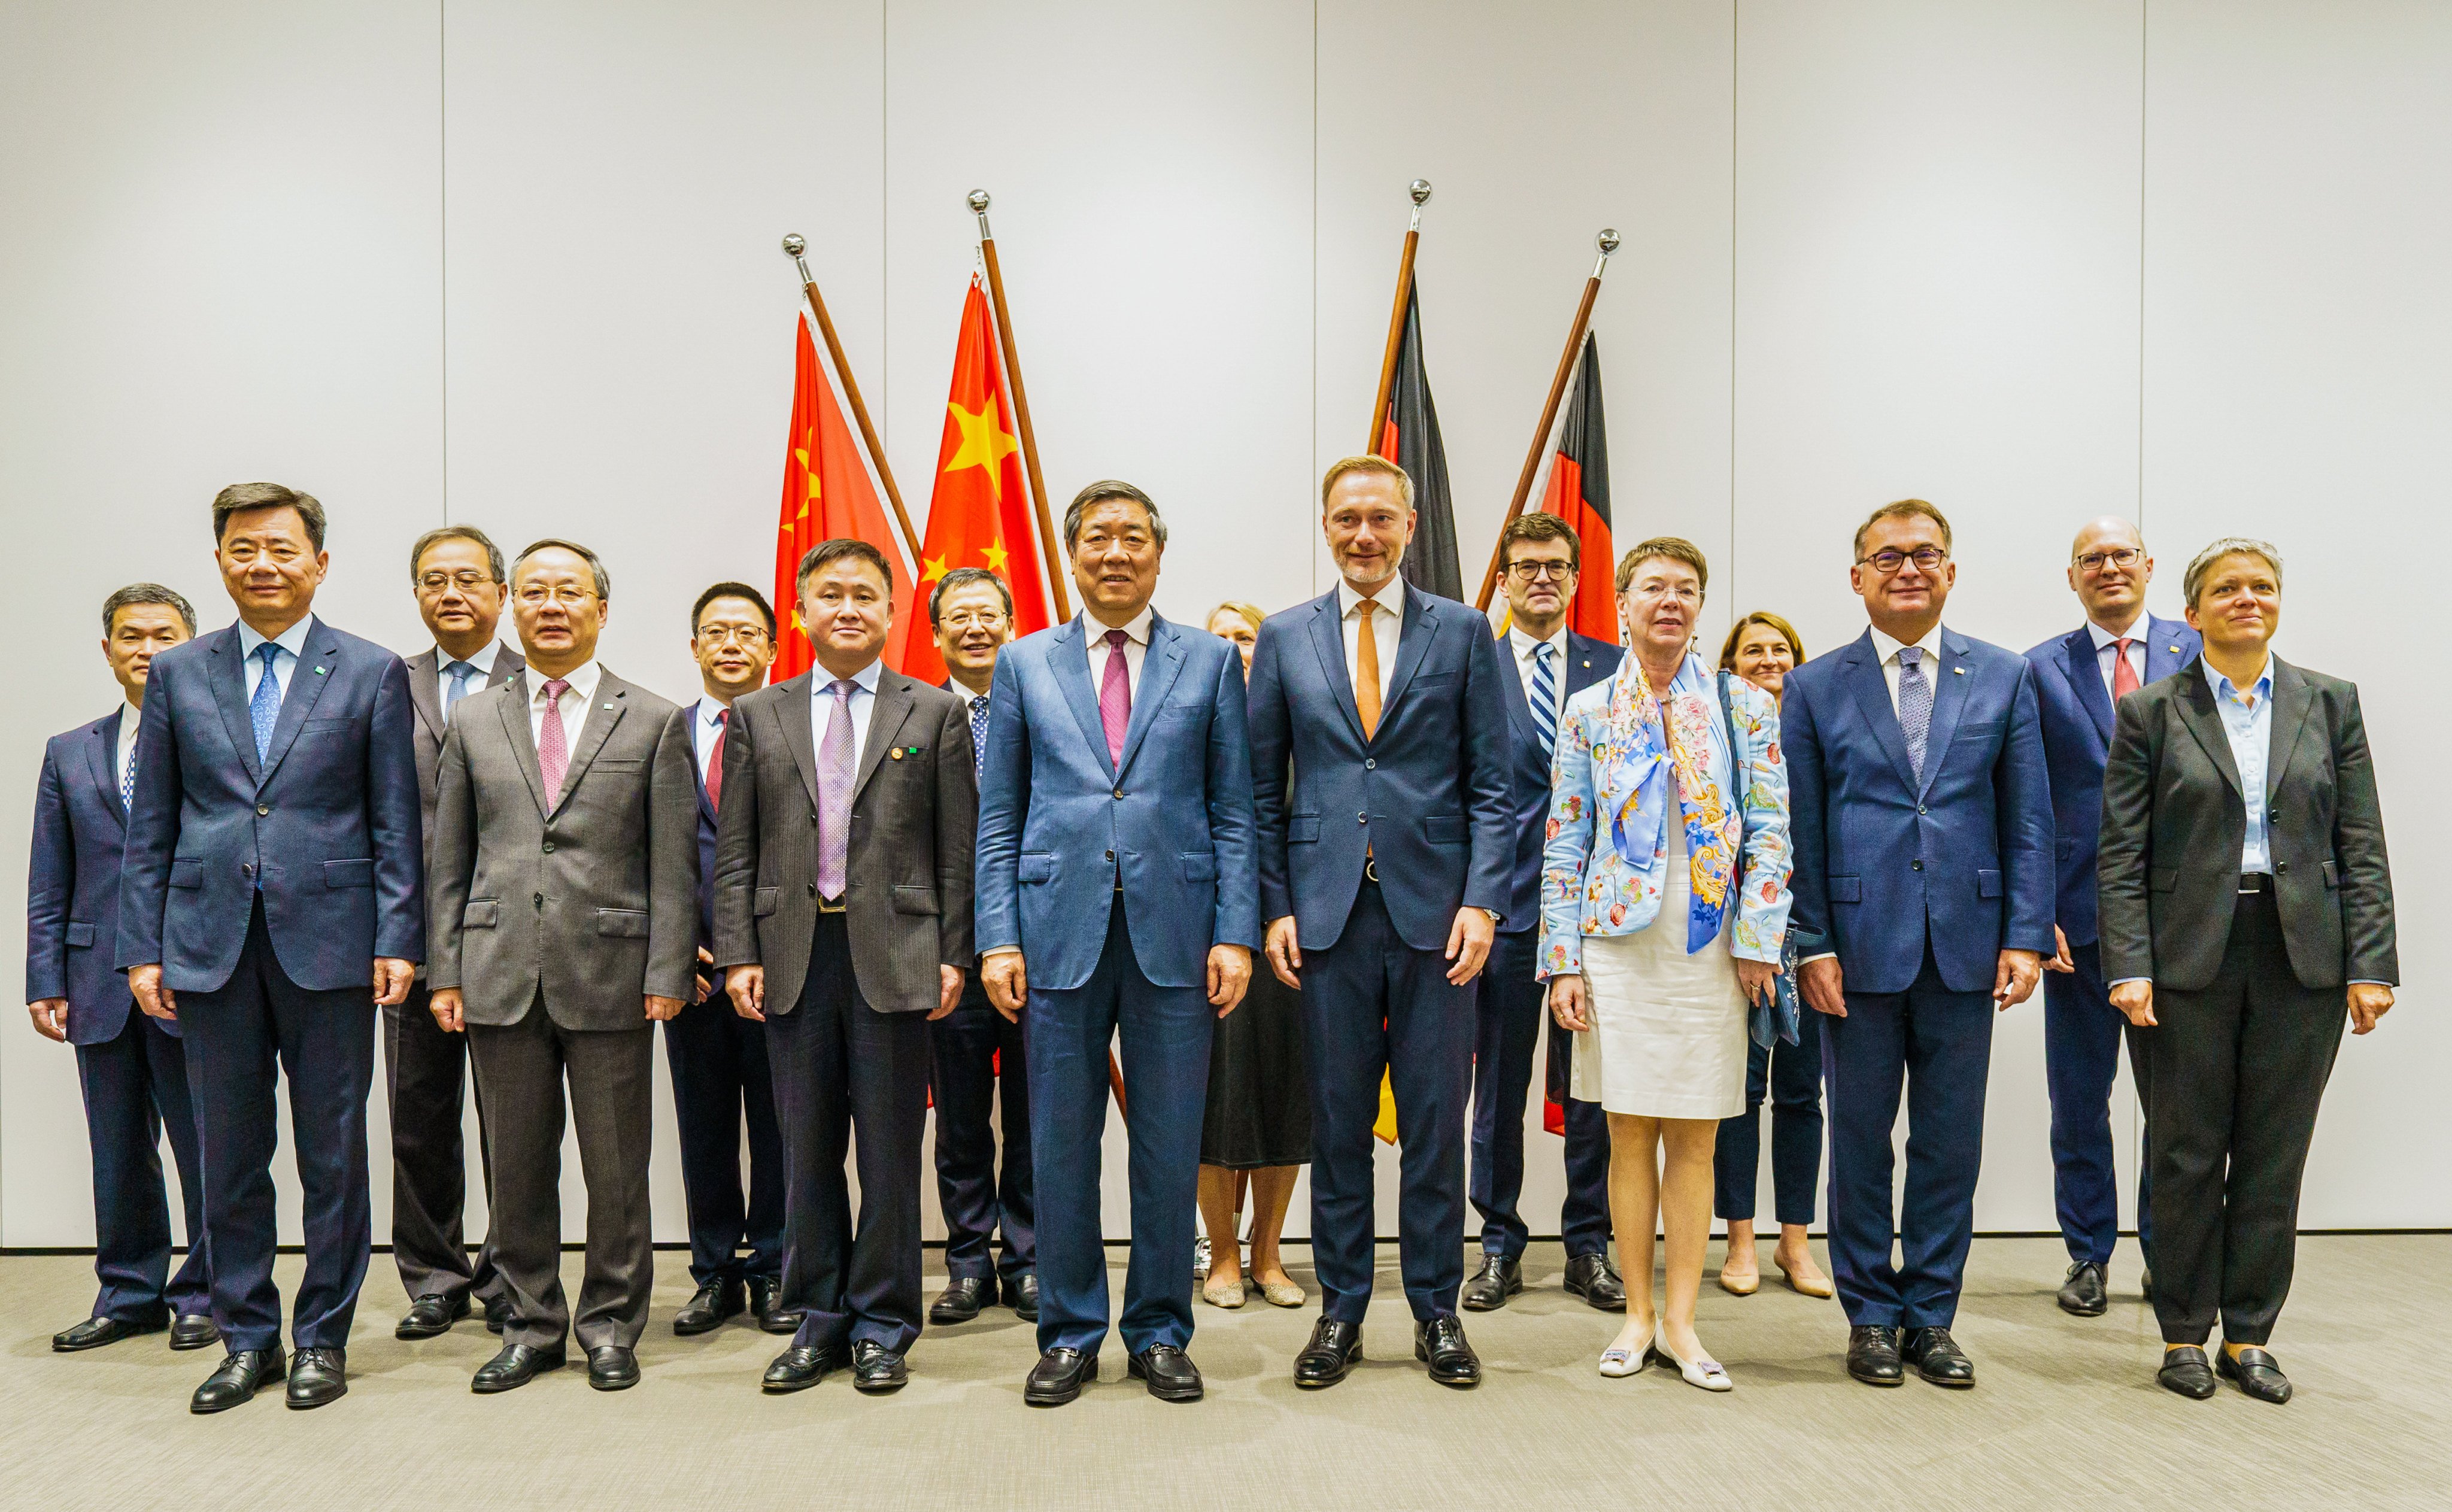 China and Germany have agreed to update an economic cooperation deal signed four years ago. Pictured in are Vice-Premier of China He Lifeng (centre-left) and Geman Minister of Finance Joachim Nagel (centre-right) with their respective delegations in Beijing on Sunday. Photo: dpa